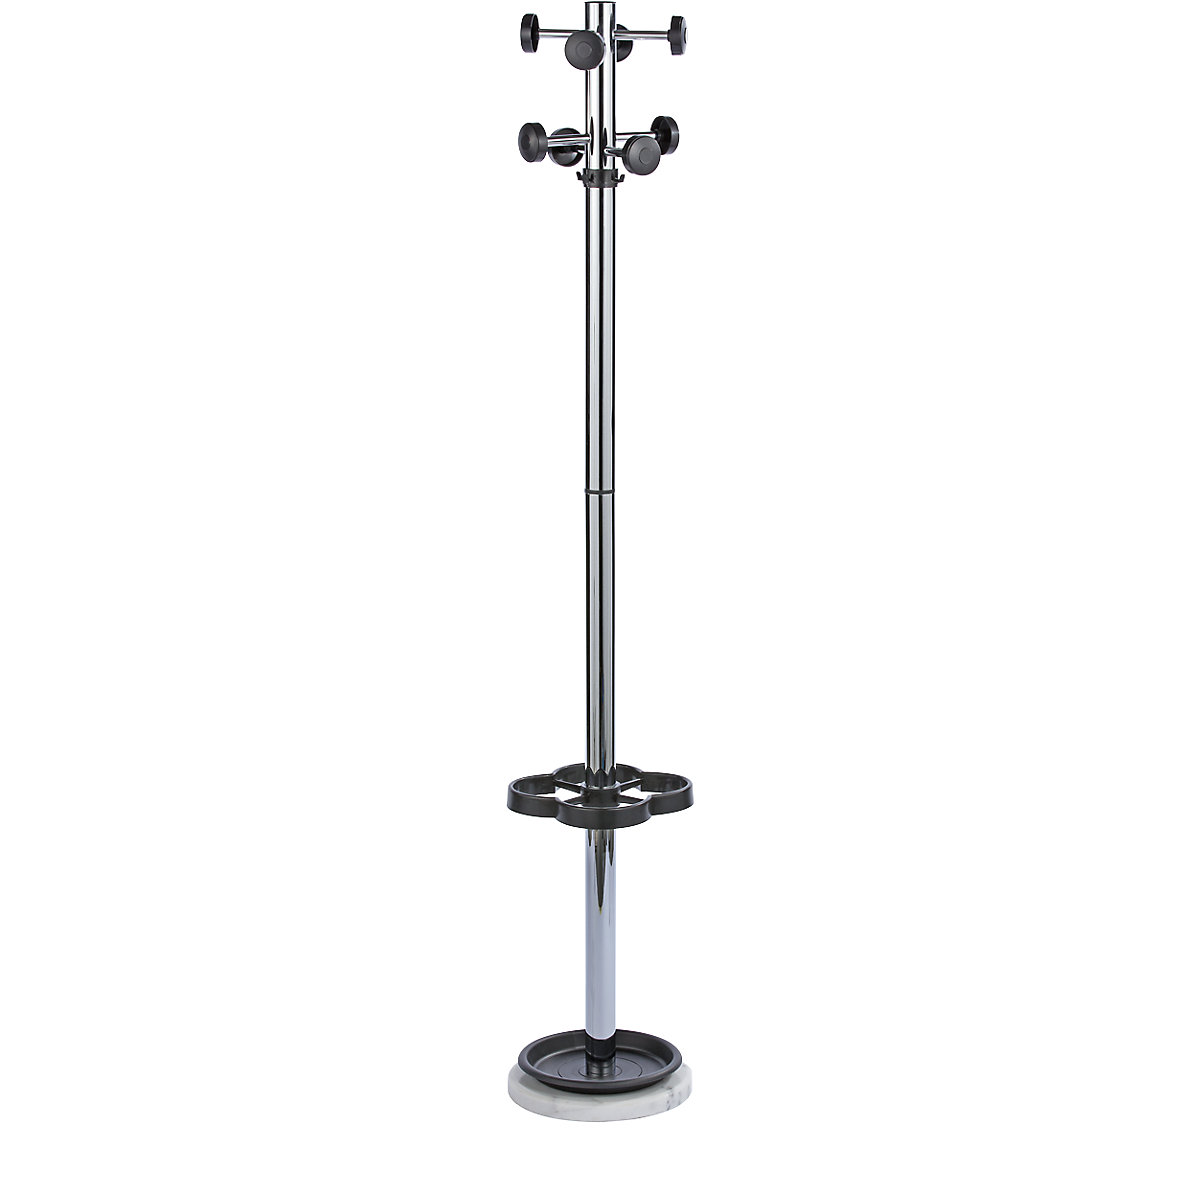 Coat stand with black hook knobs, height 1700 mm, Ø 300 mm, chrome plated-2